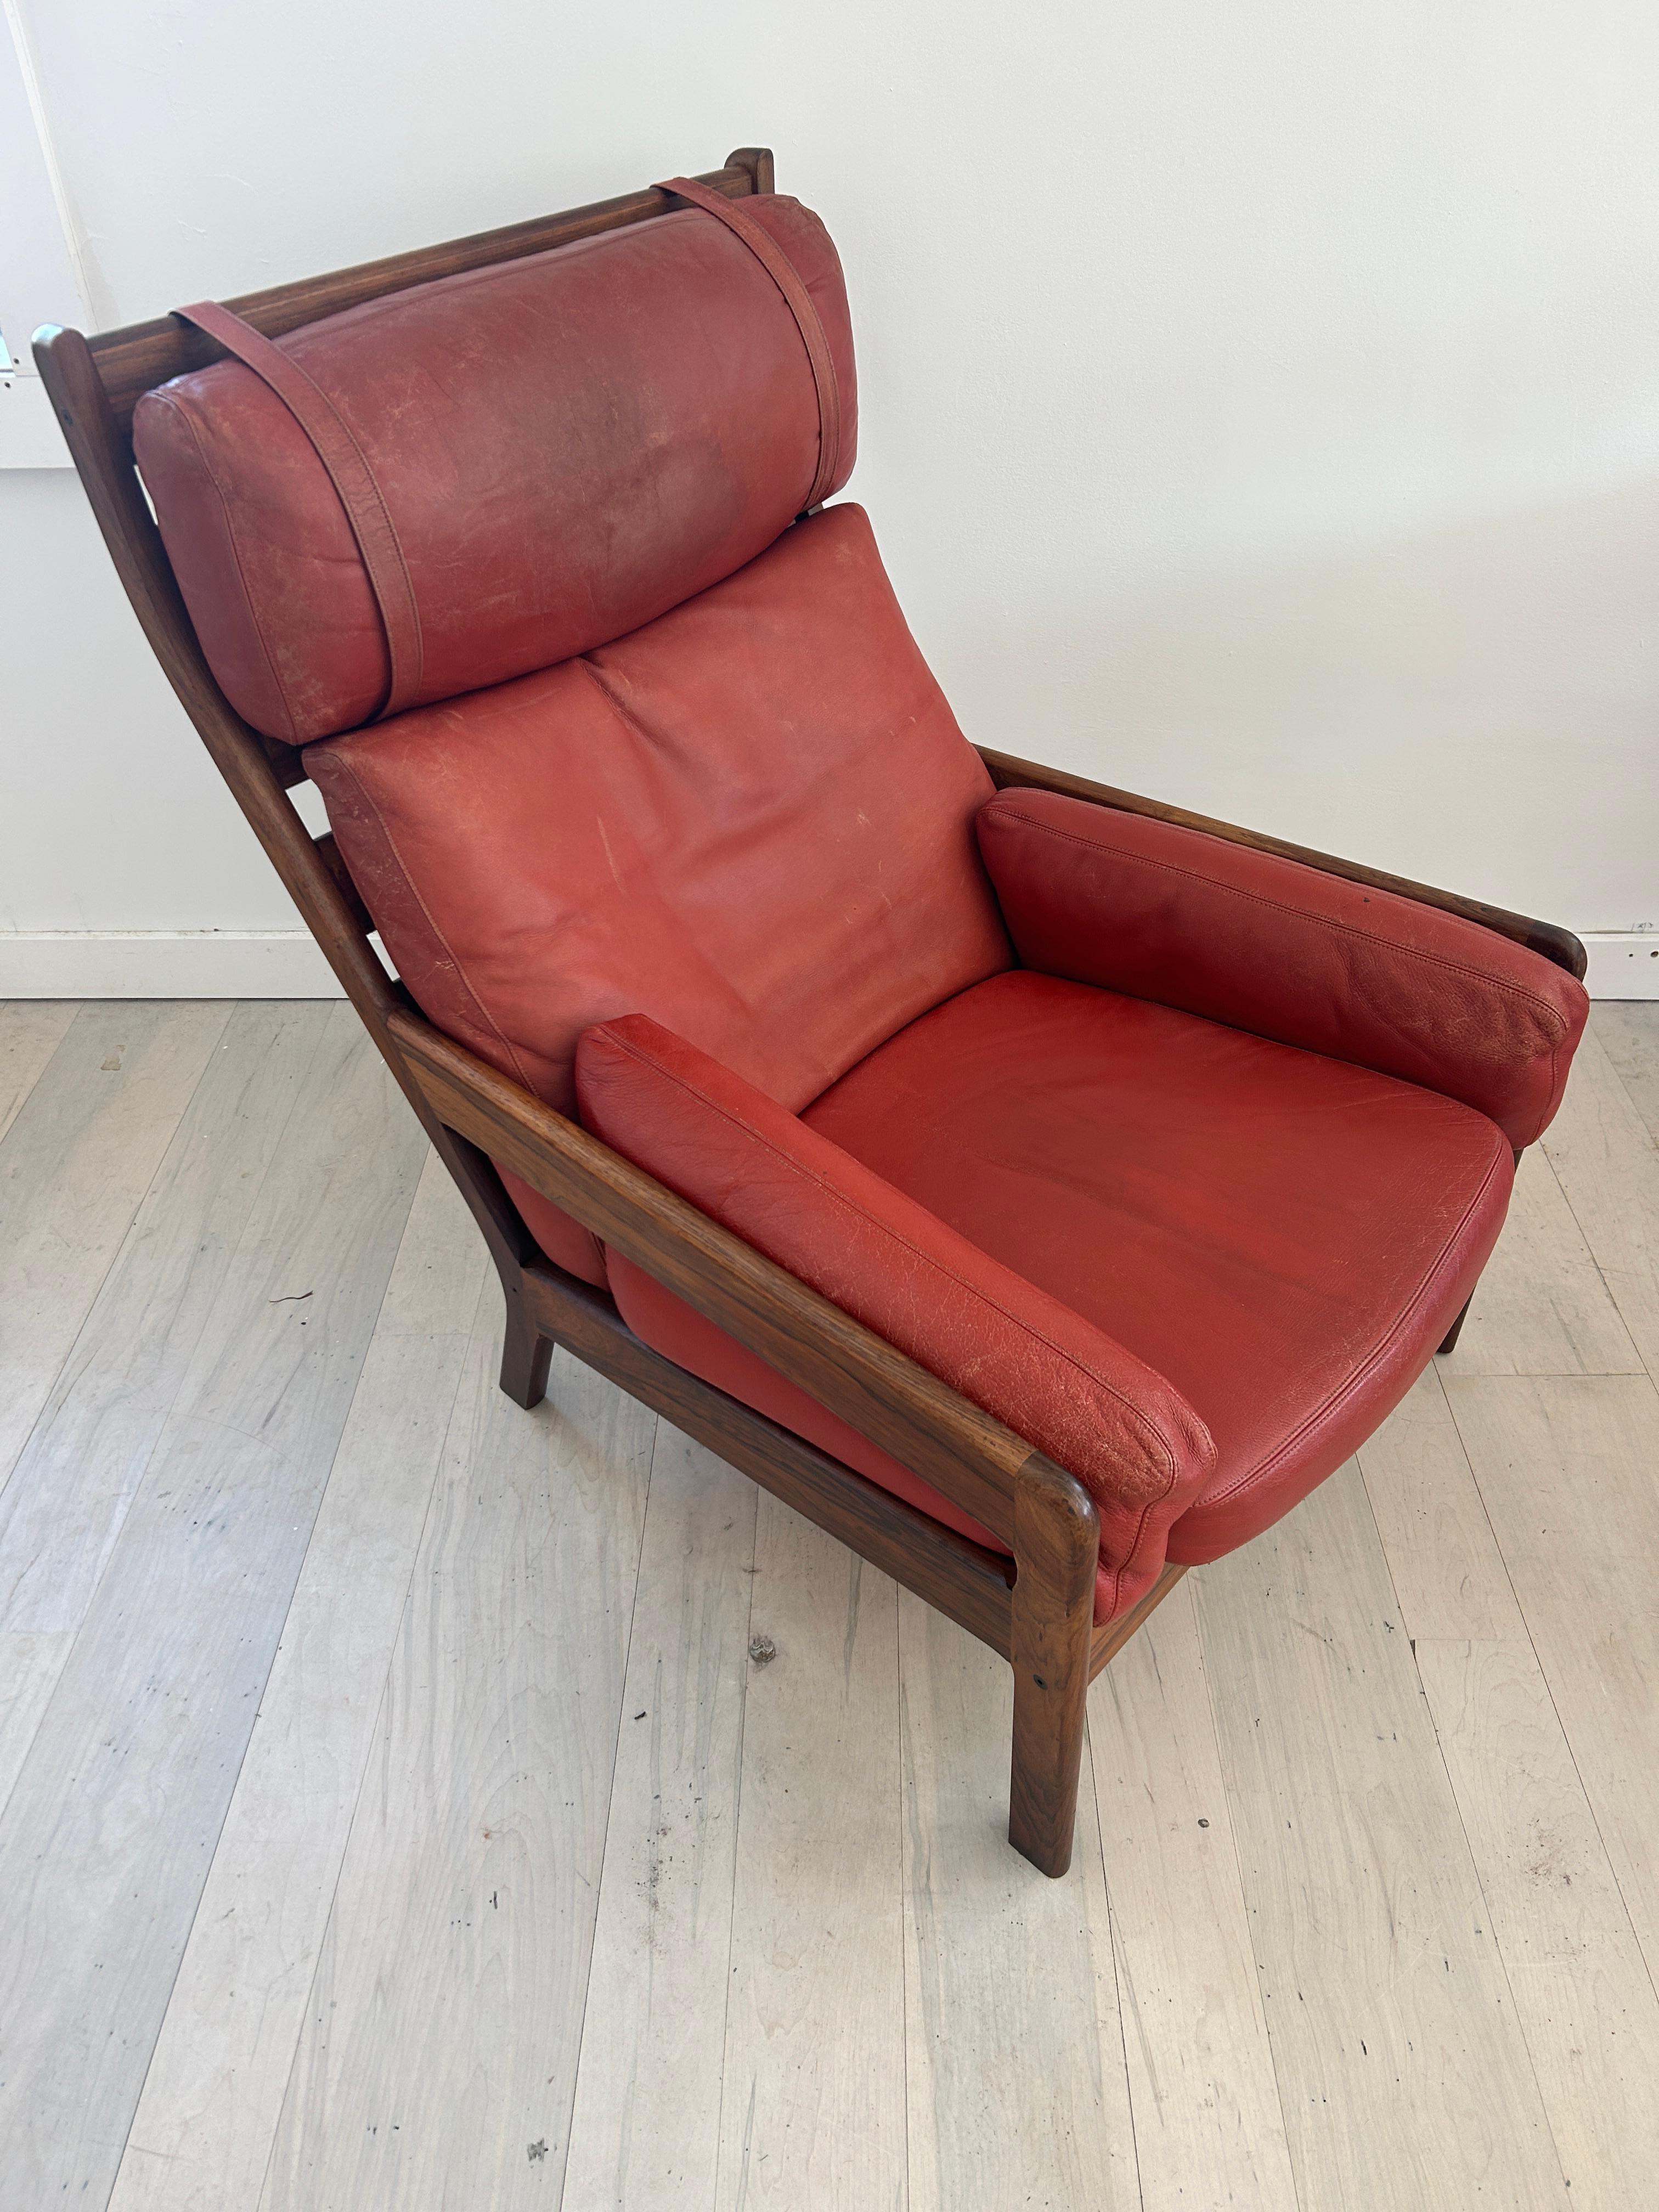 Woodwork Midcentury Scandinavian Modern Solid Rosewood Red Leather Lounge Chair For Sale